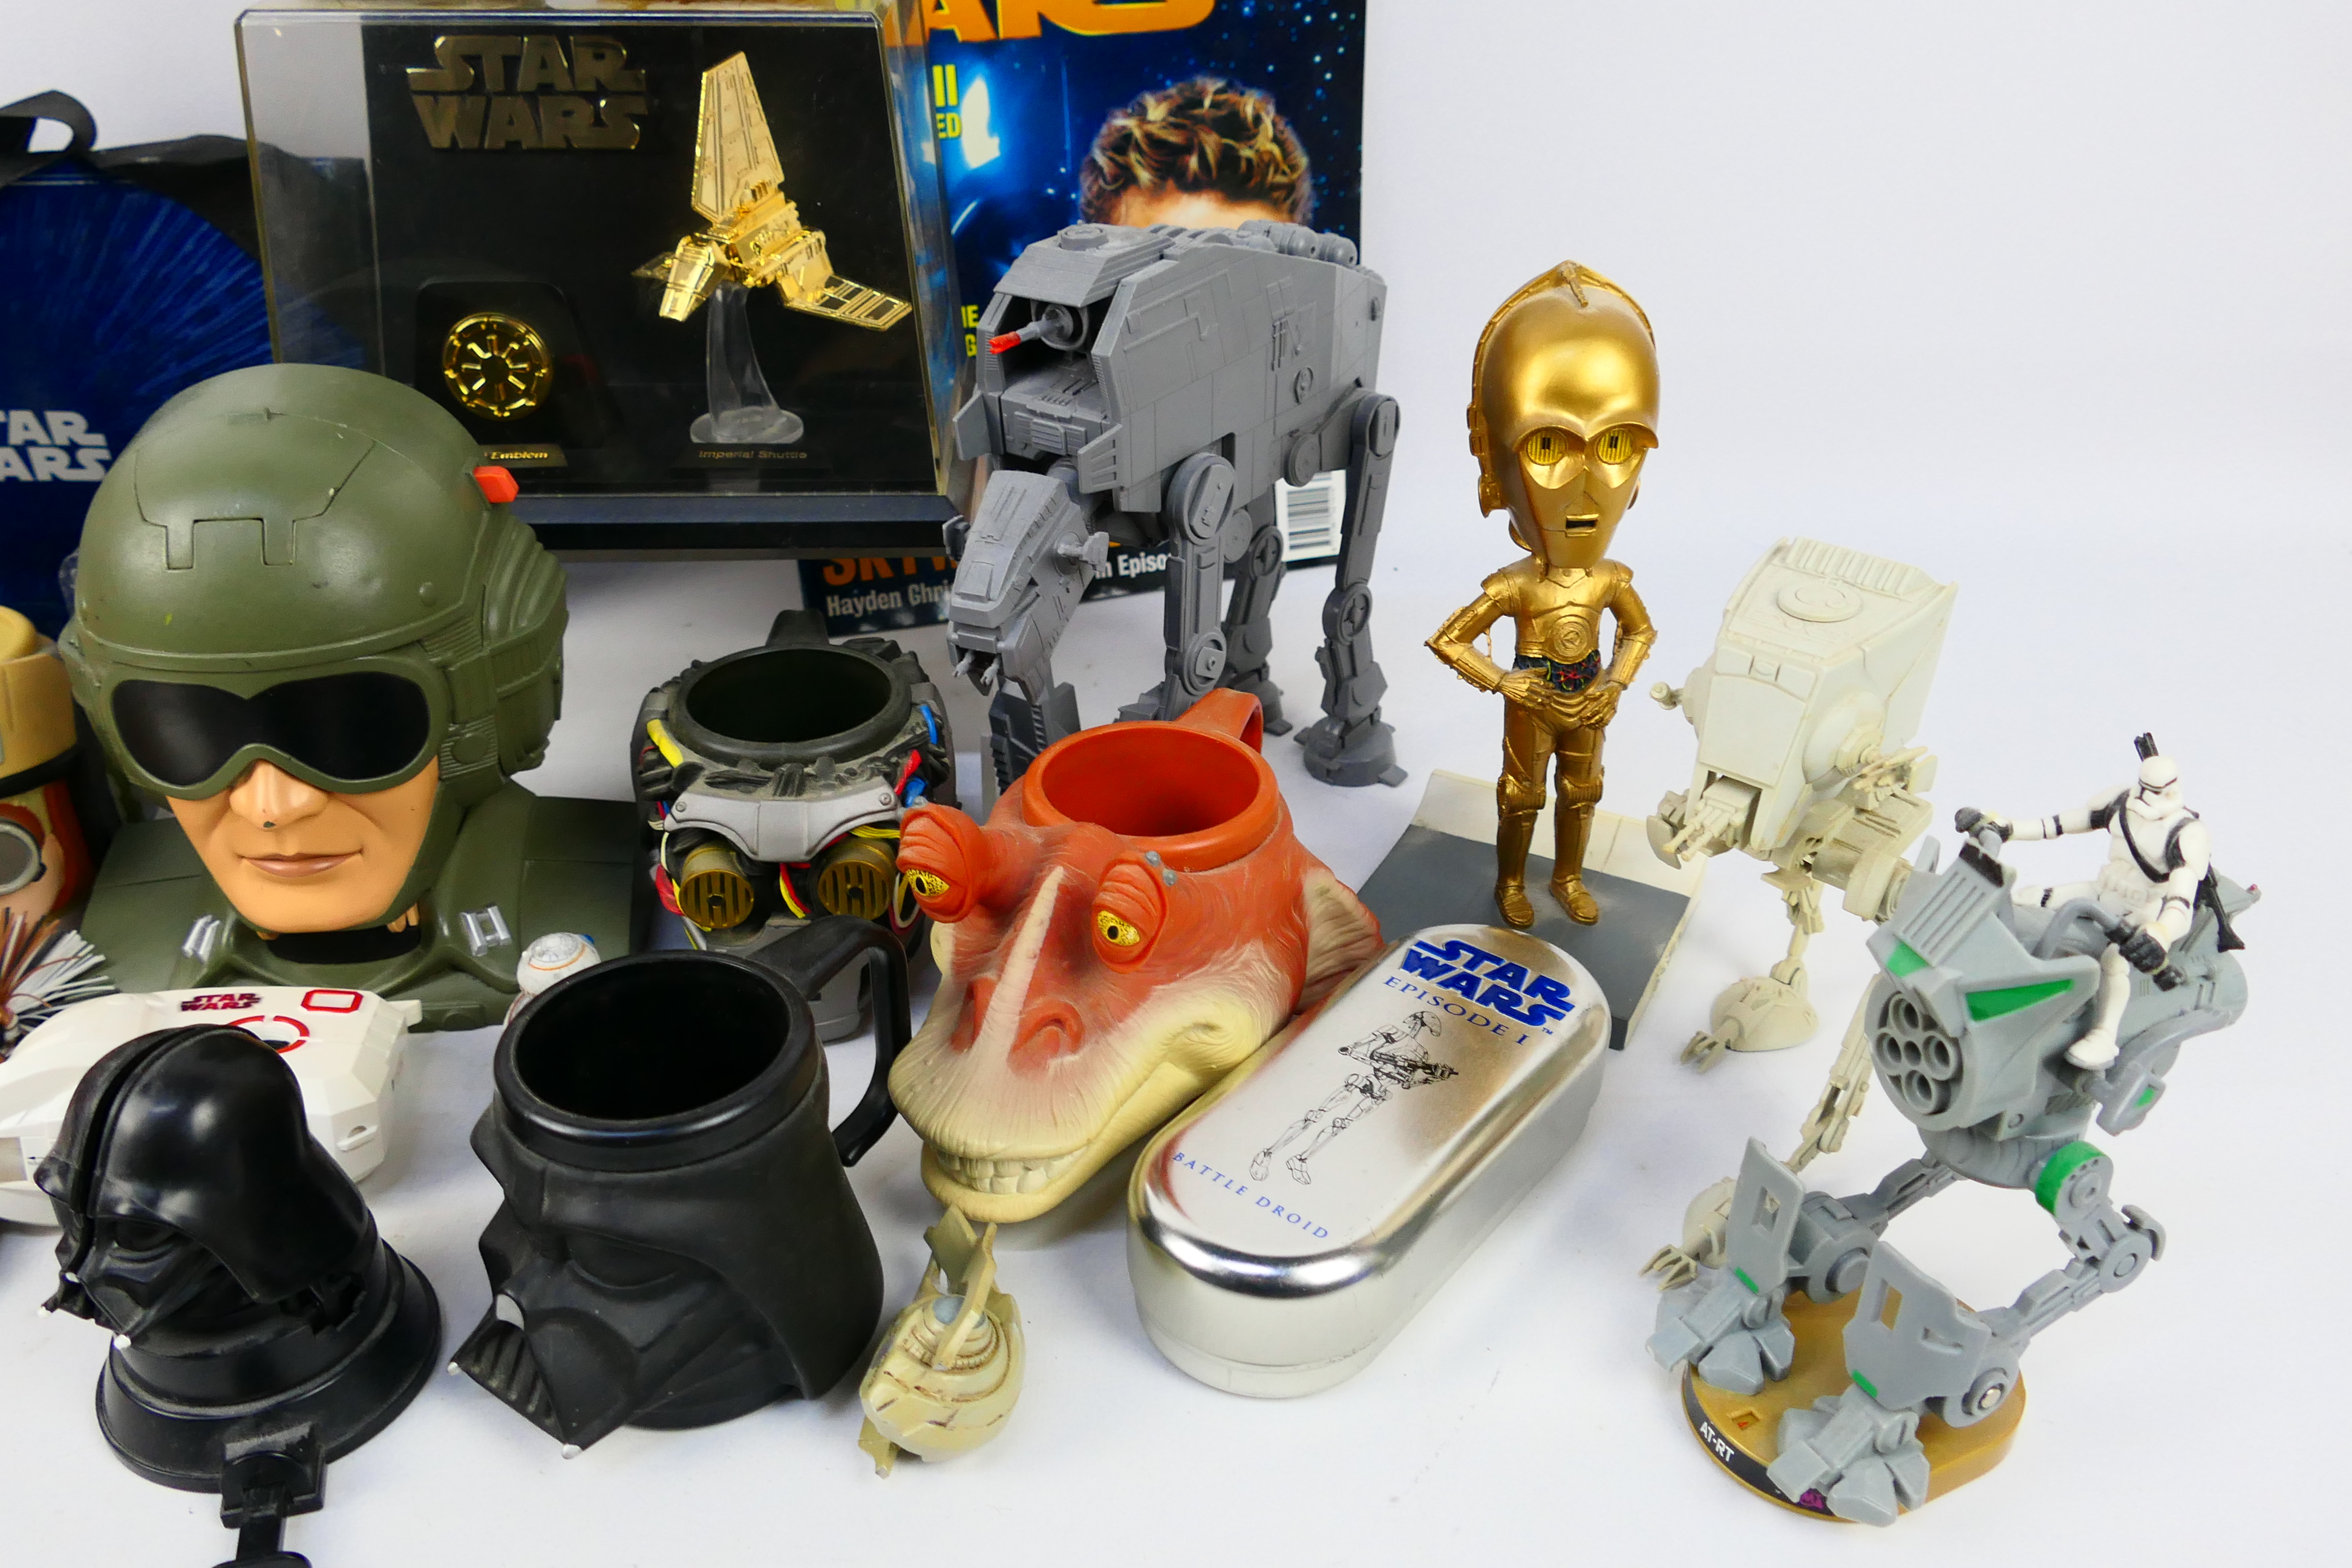 Hasbro - Star Wars - A collection of Star Wars items including 3 x Official Fan Club Journal issues, - Image 5 of 5